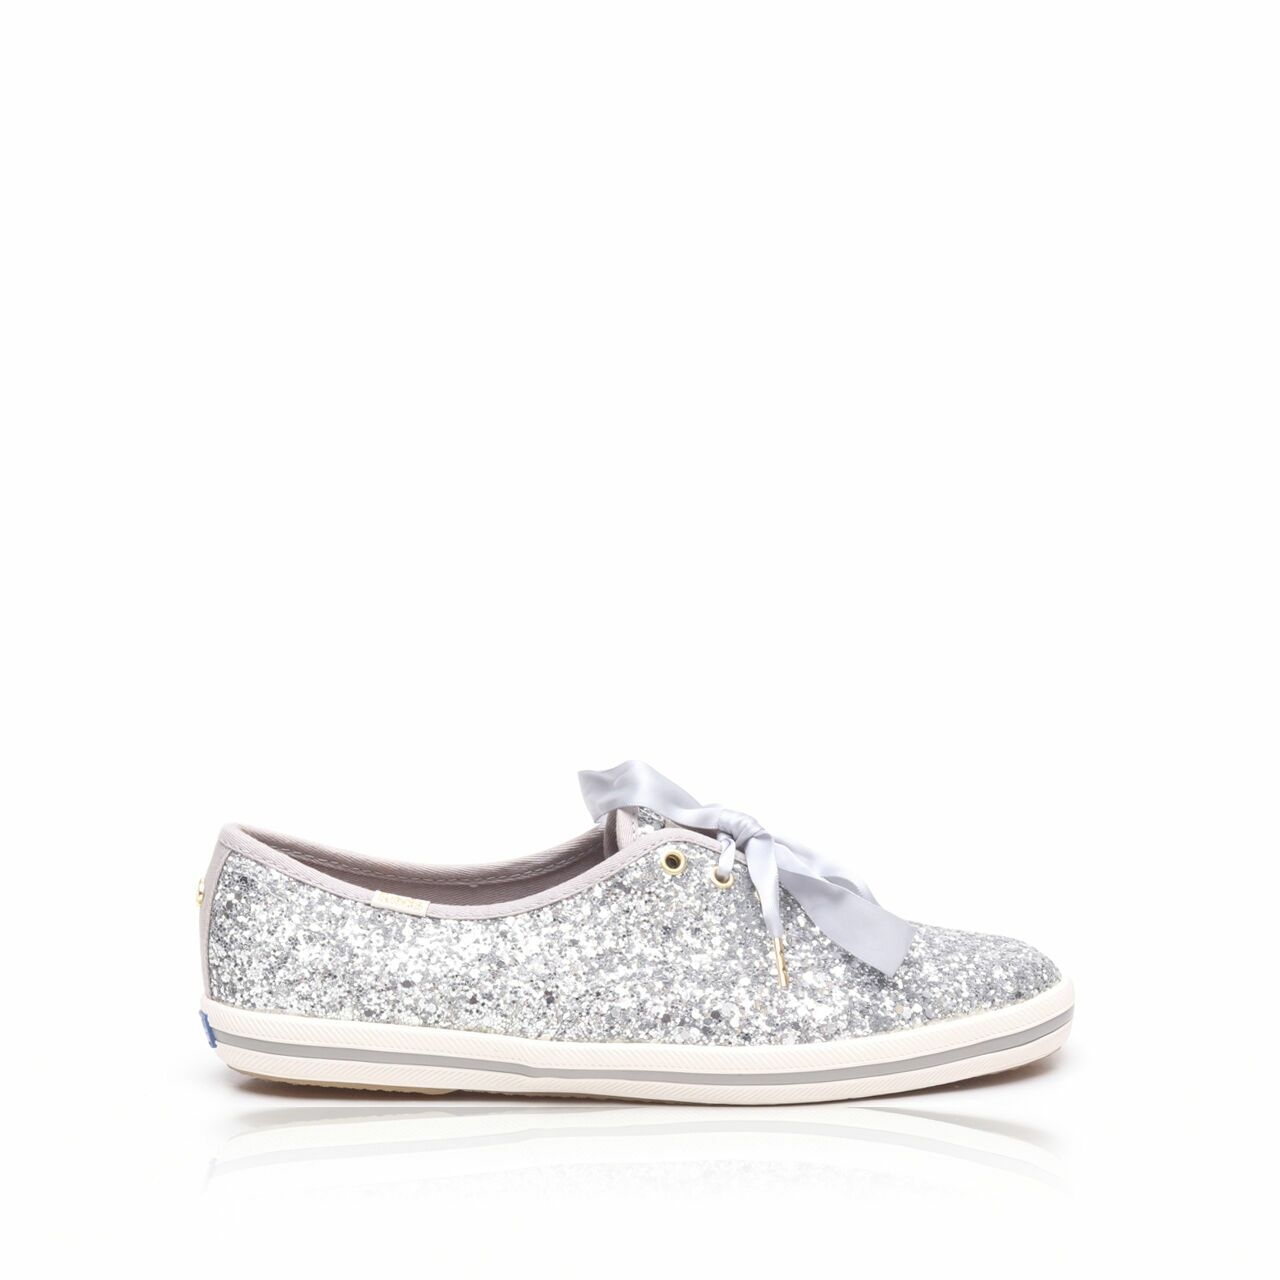 Keds For Kate Spade Champion Silver Glitter Sneakers